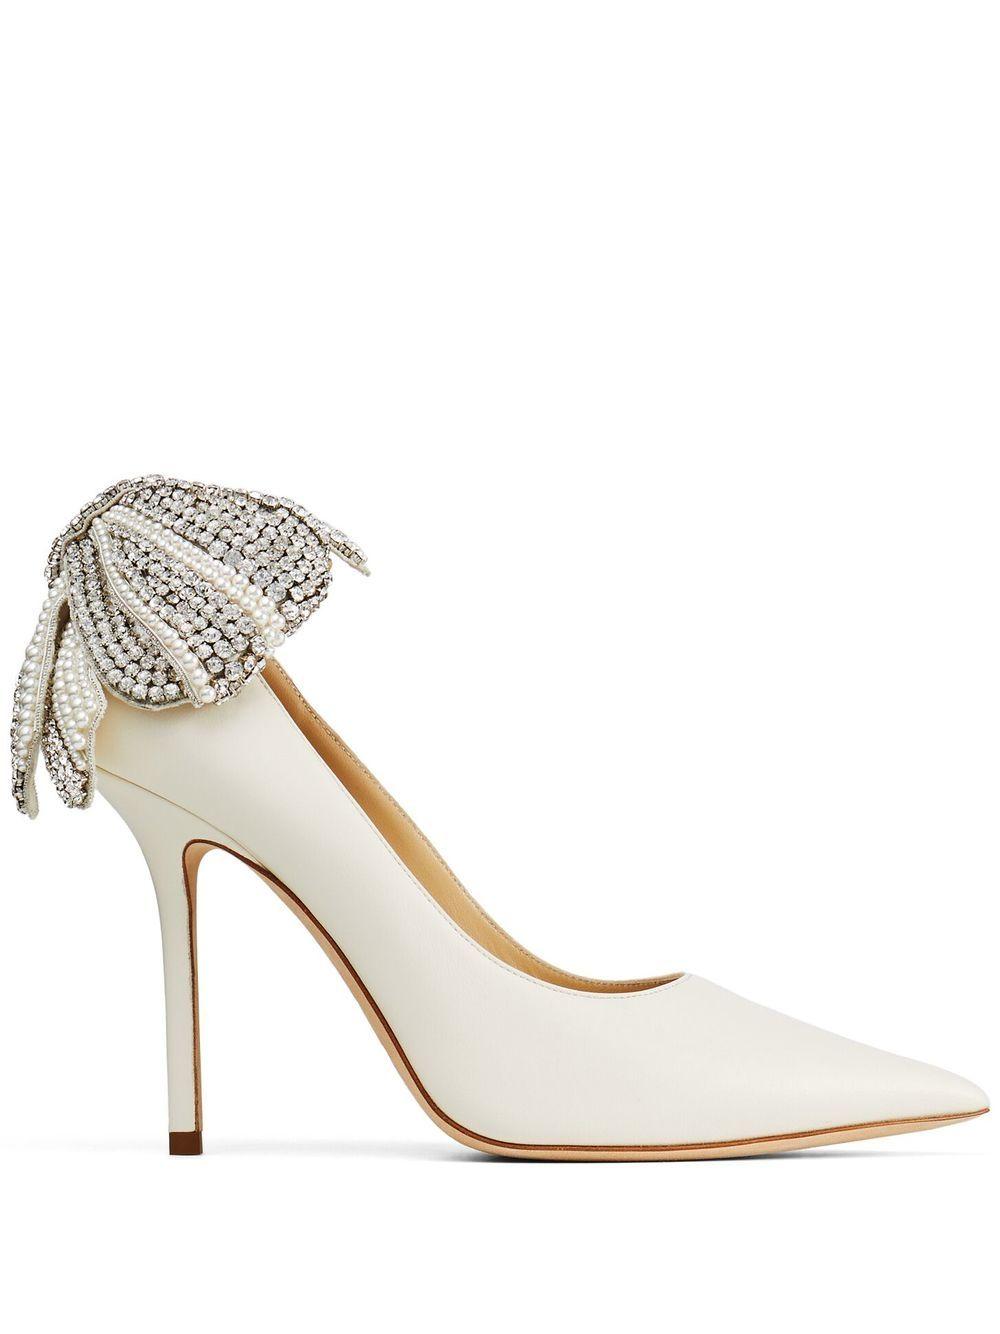 Jimmy Choo Love 100mm Bow-detail Leather Pumps in White | Lyst